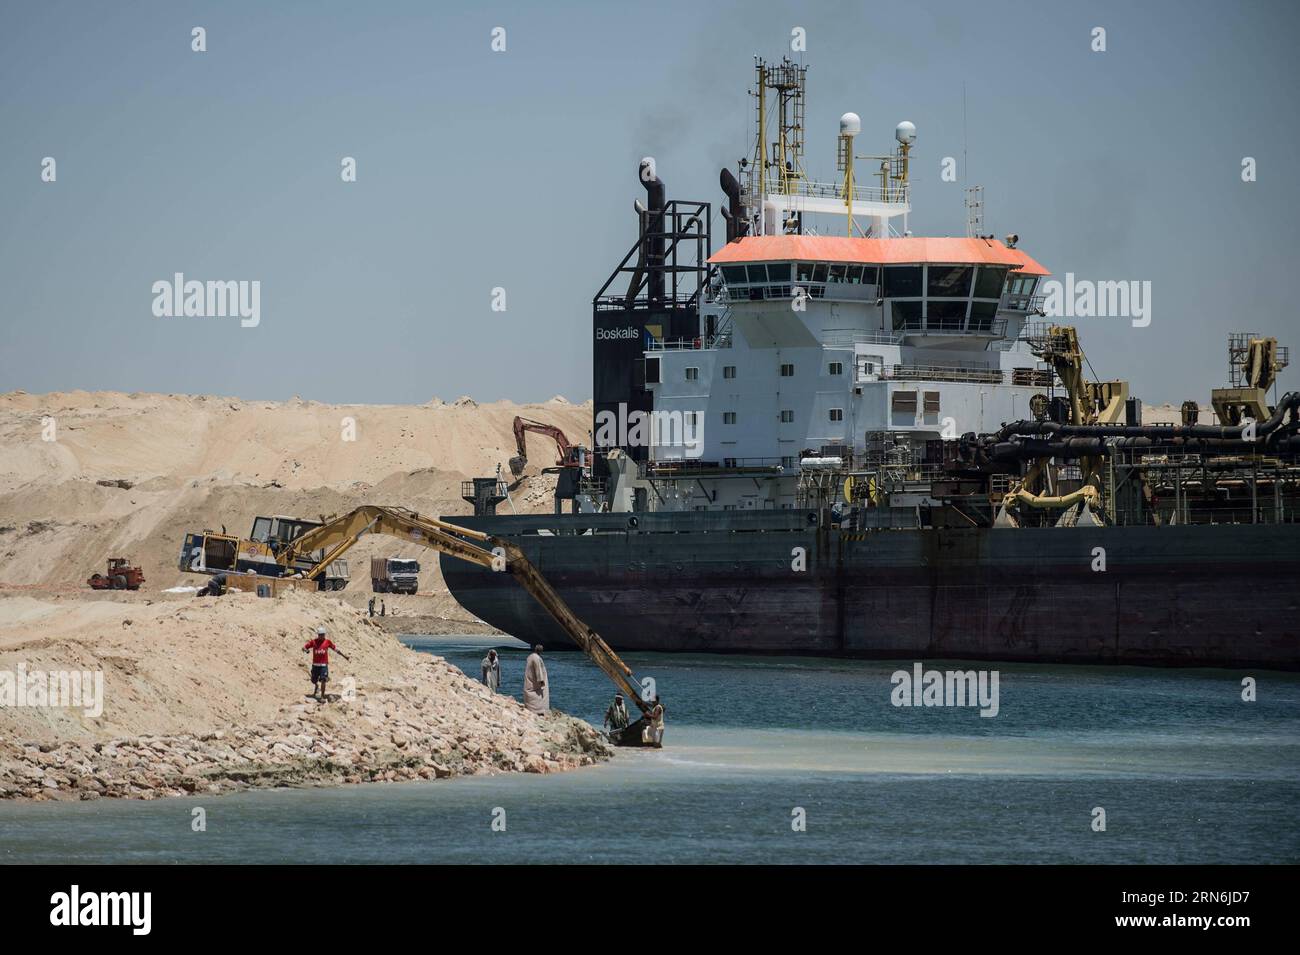 WIRTSCHAFT Ägypten: Neuer Suezkanal fertig gestellt (150729) -- ISMAILIA, July 29, 2015 -- Workers are seen on the construction site of the new Suez Canal in Ismailia, a port city in Egypt, on July 29, 2015. The dredging work of Egypt s New Suez Canal has been completed and the waterway is ready as well as safe for huge ship navigation, Mohab Memish, head of the Suez Canal Authority (SCA), told reporters in a press conference Wednesday. ) EGYPT-ISMAILIA-NEW SUEZ CANAL PanxChaoyue PUBLICATIONxNOTxINxCHN   Economy Egypt later Suez Canal ready asked 150729 Ismailia July 29 2015 Workers are Lakes Stock Photo